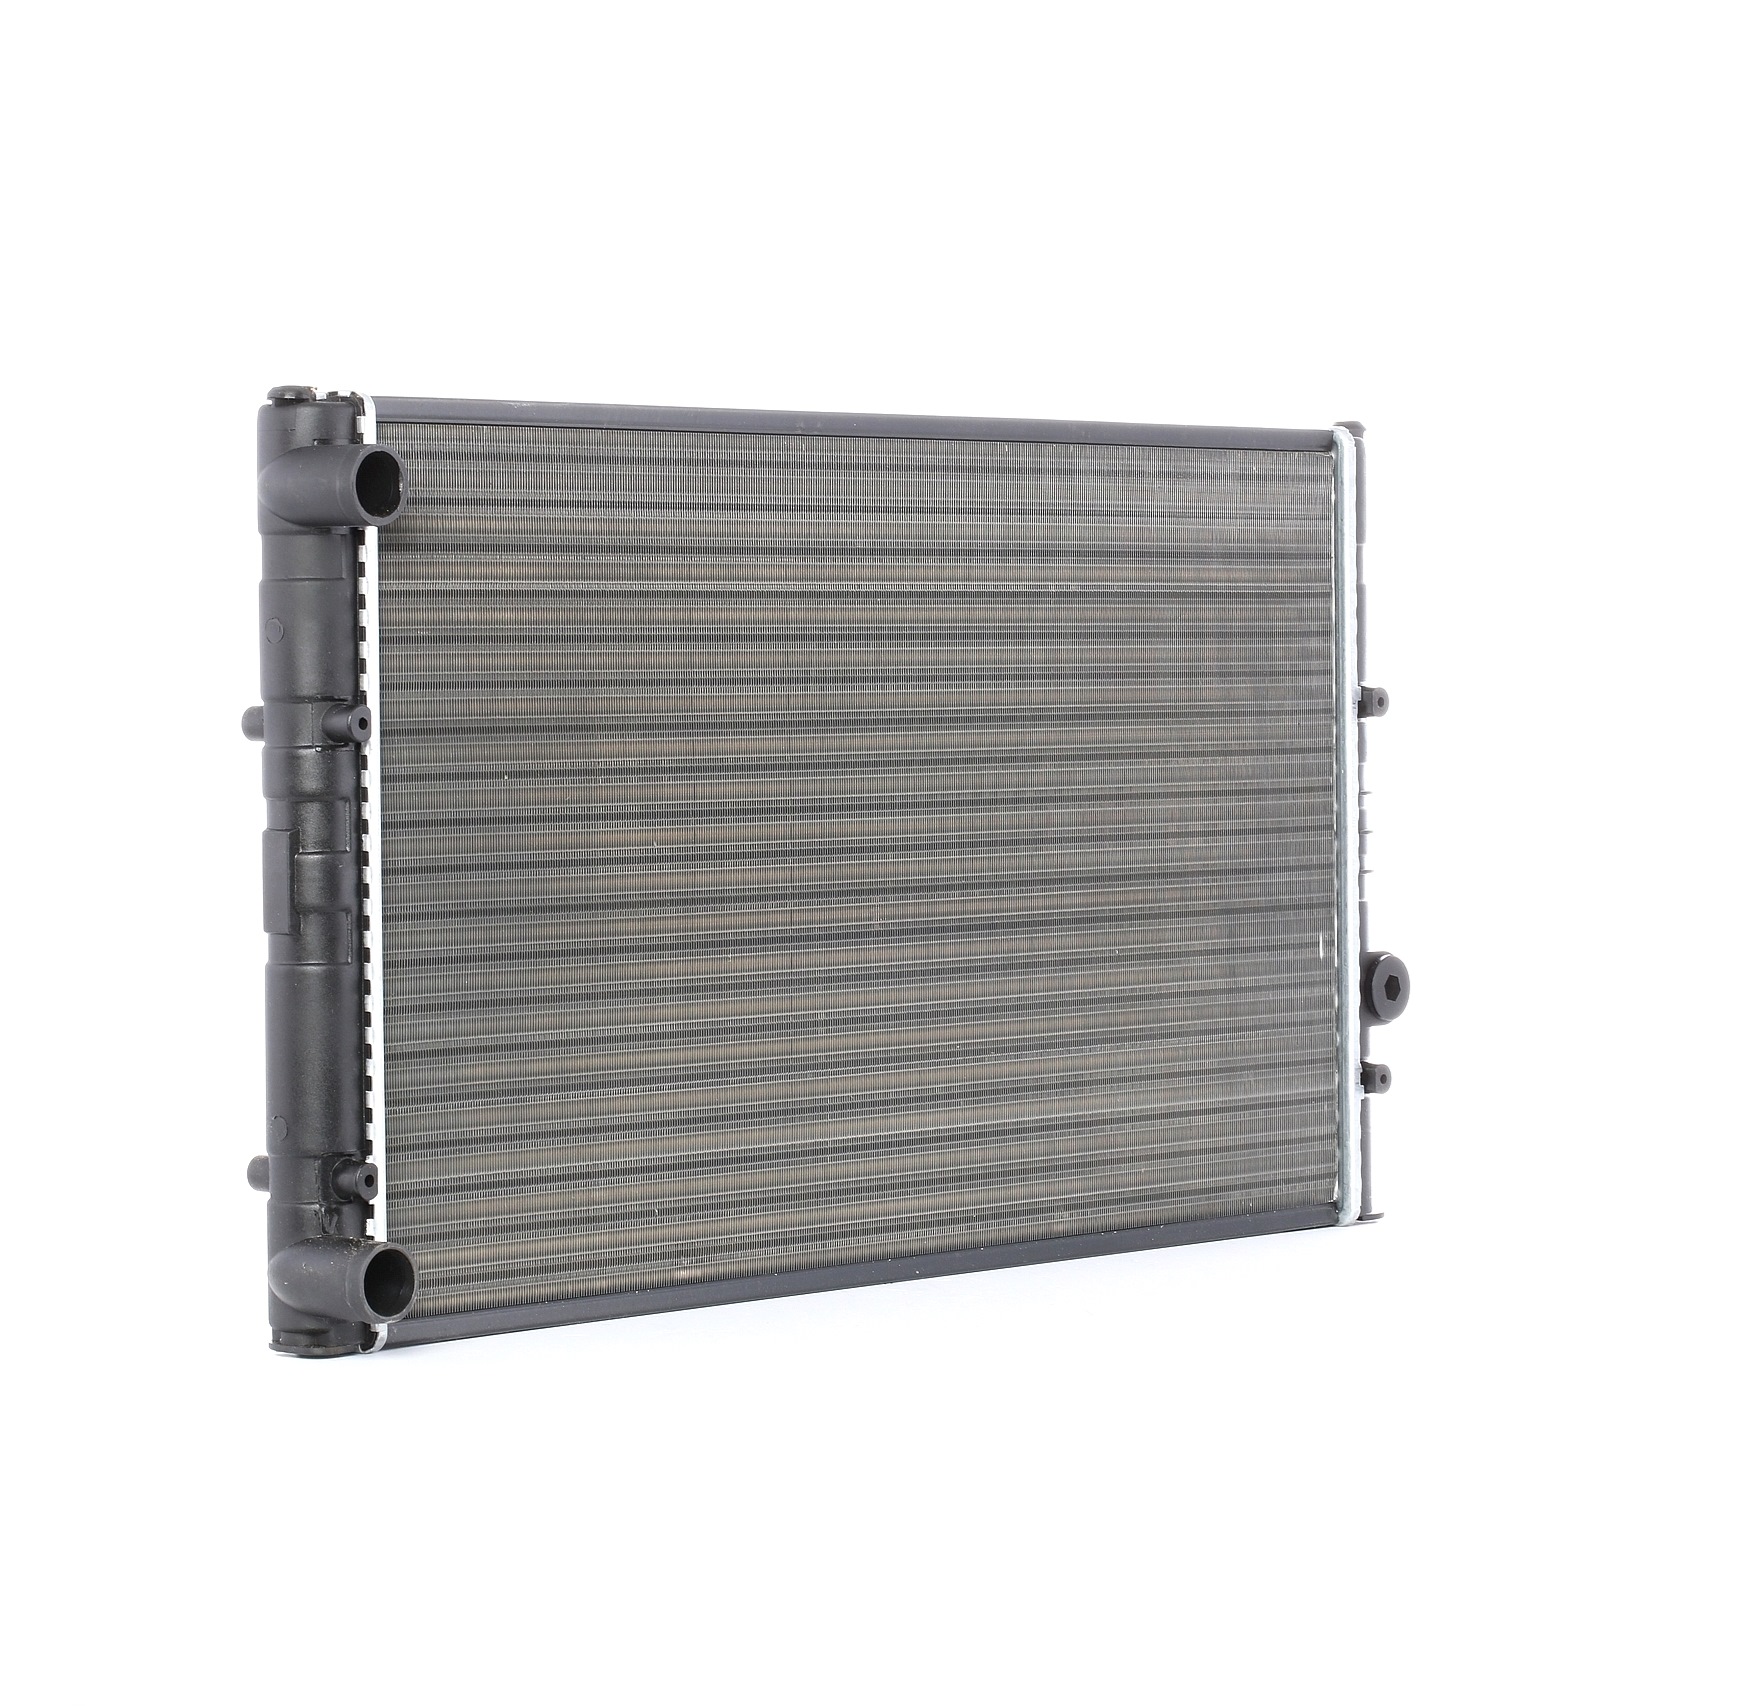 RIDEX 470R0258 Engine radiator for vehicles with air conditioning, 628 x 378 x 34 mm, Automatic Transmission, Manual Transmission, Mechanically jointed cooling fins